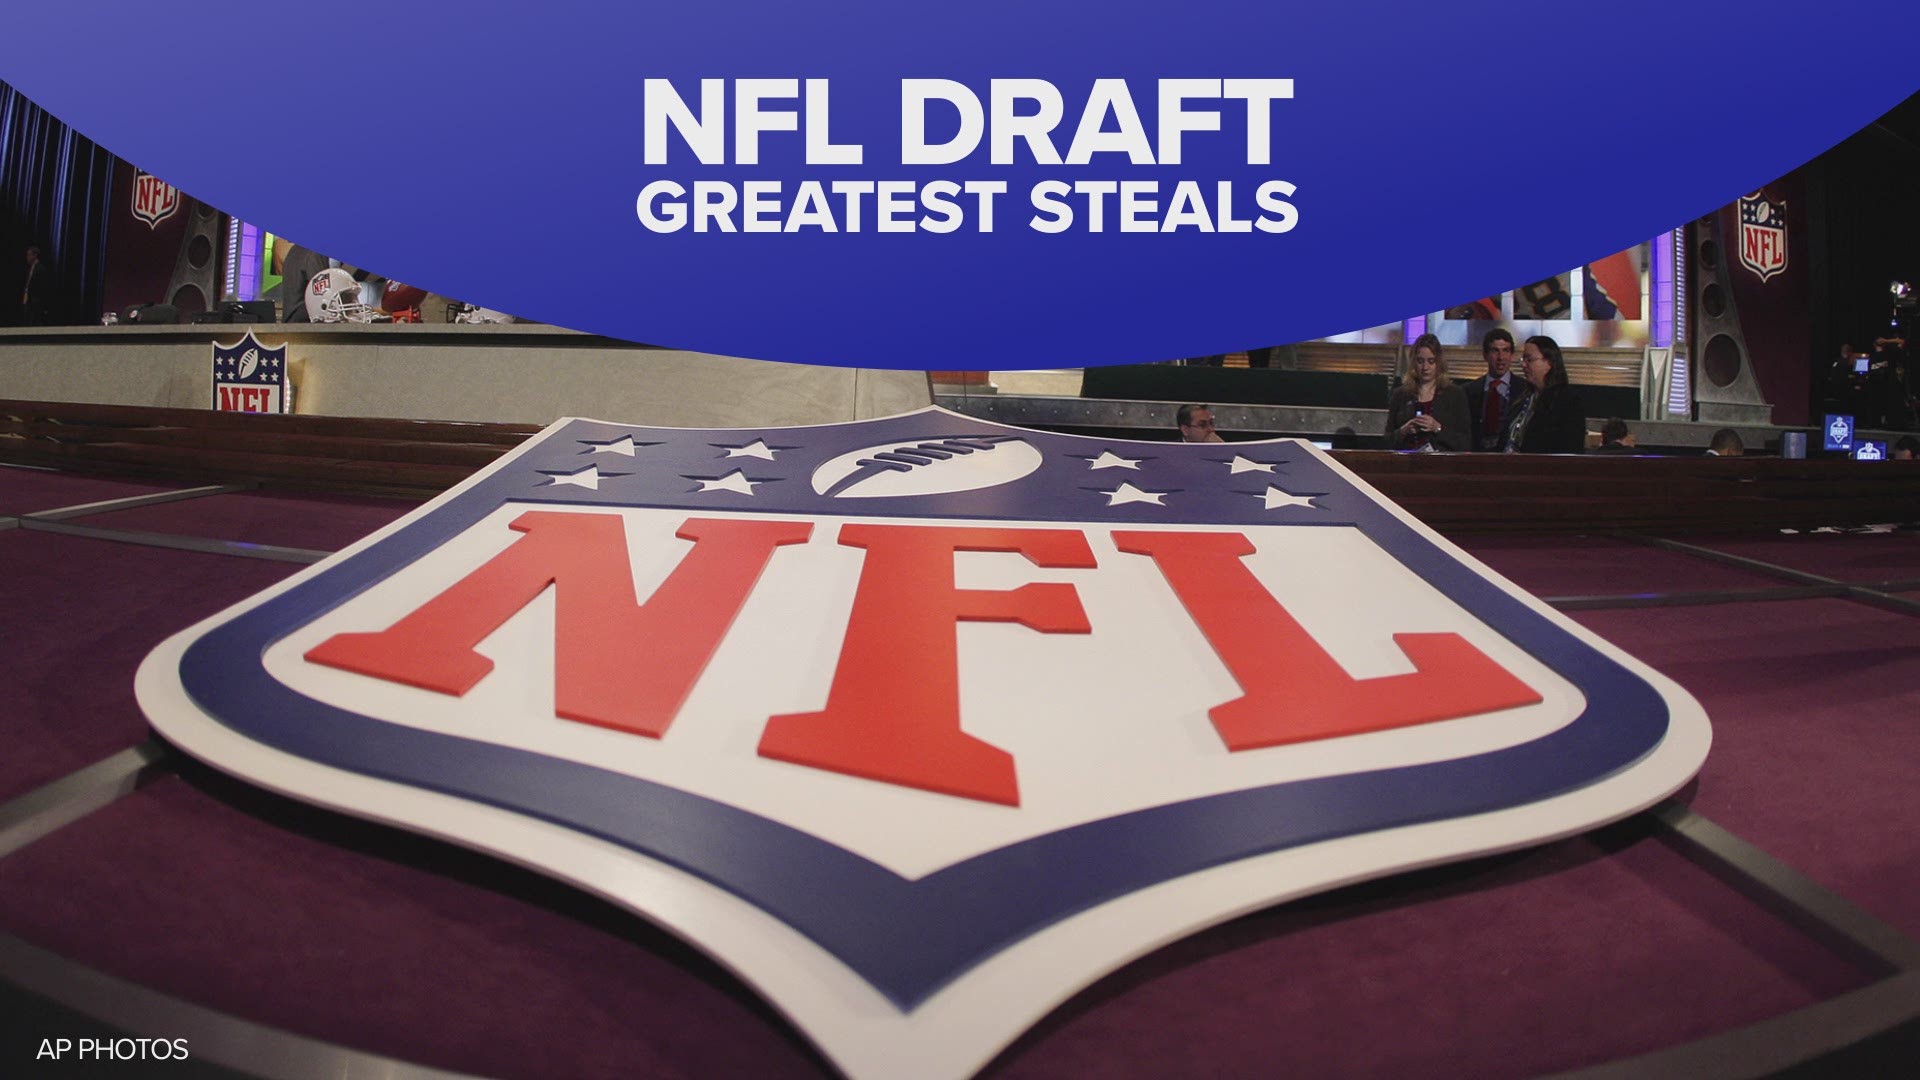 A 5-time Super Bowl MVP, a 3-time league MVP that 21 teams passed on and an undersized quarterback are among the greatest NFL Draft steals.